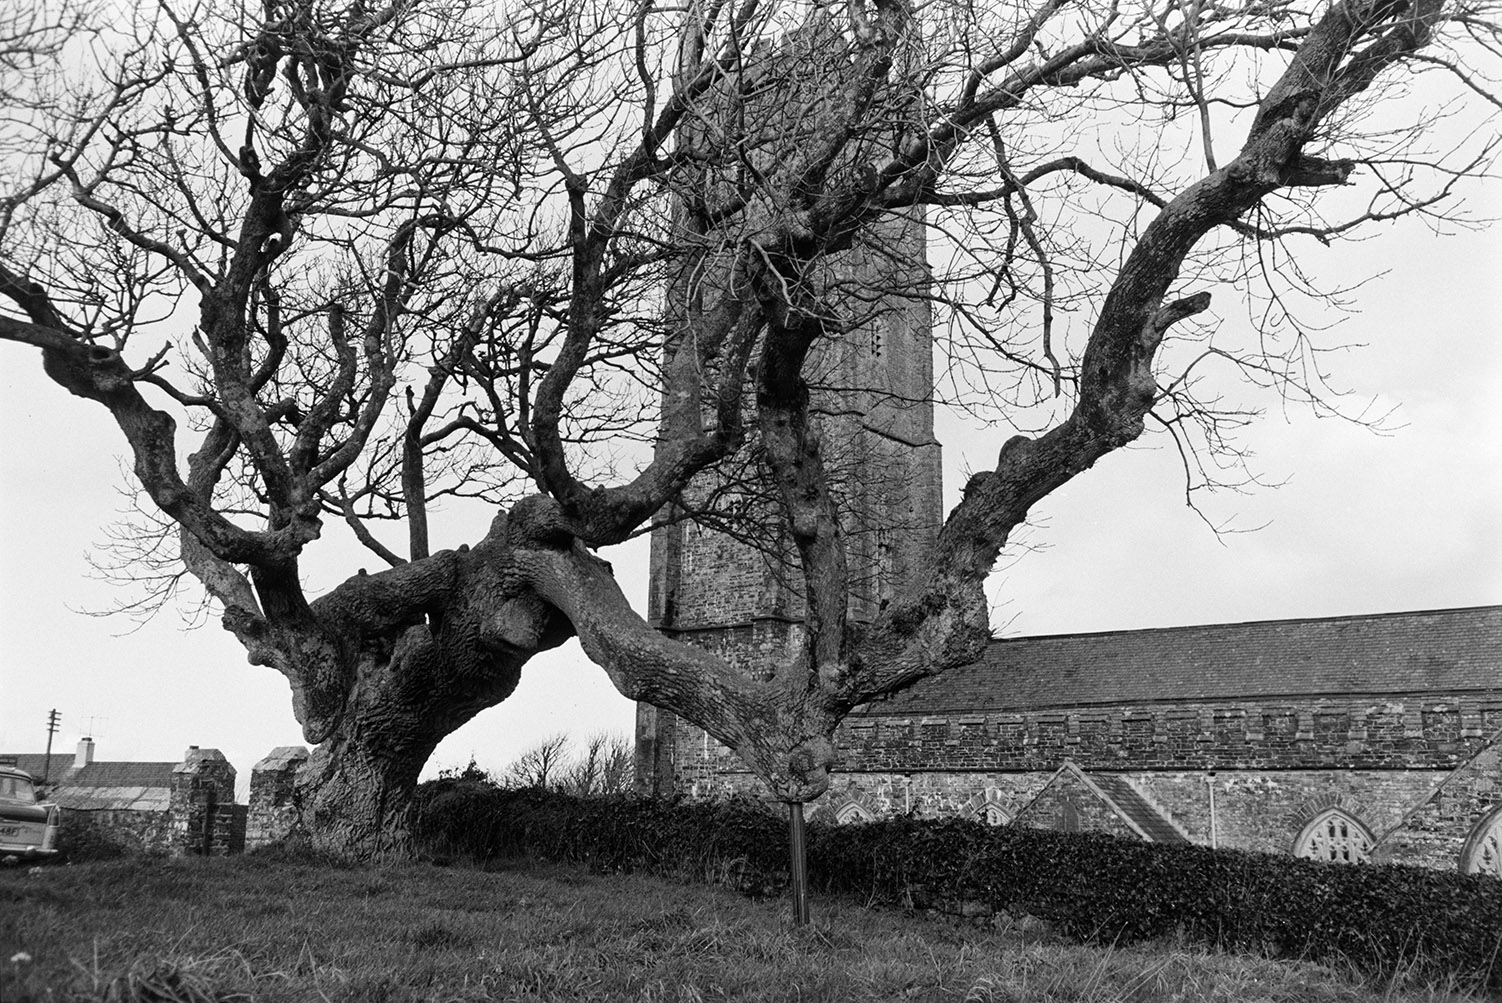 Hartland Church behind a tree which is being supported by a metal pole.